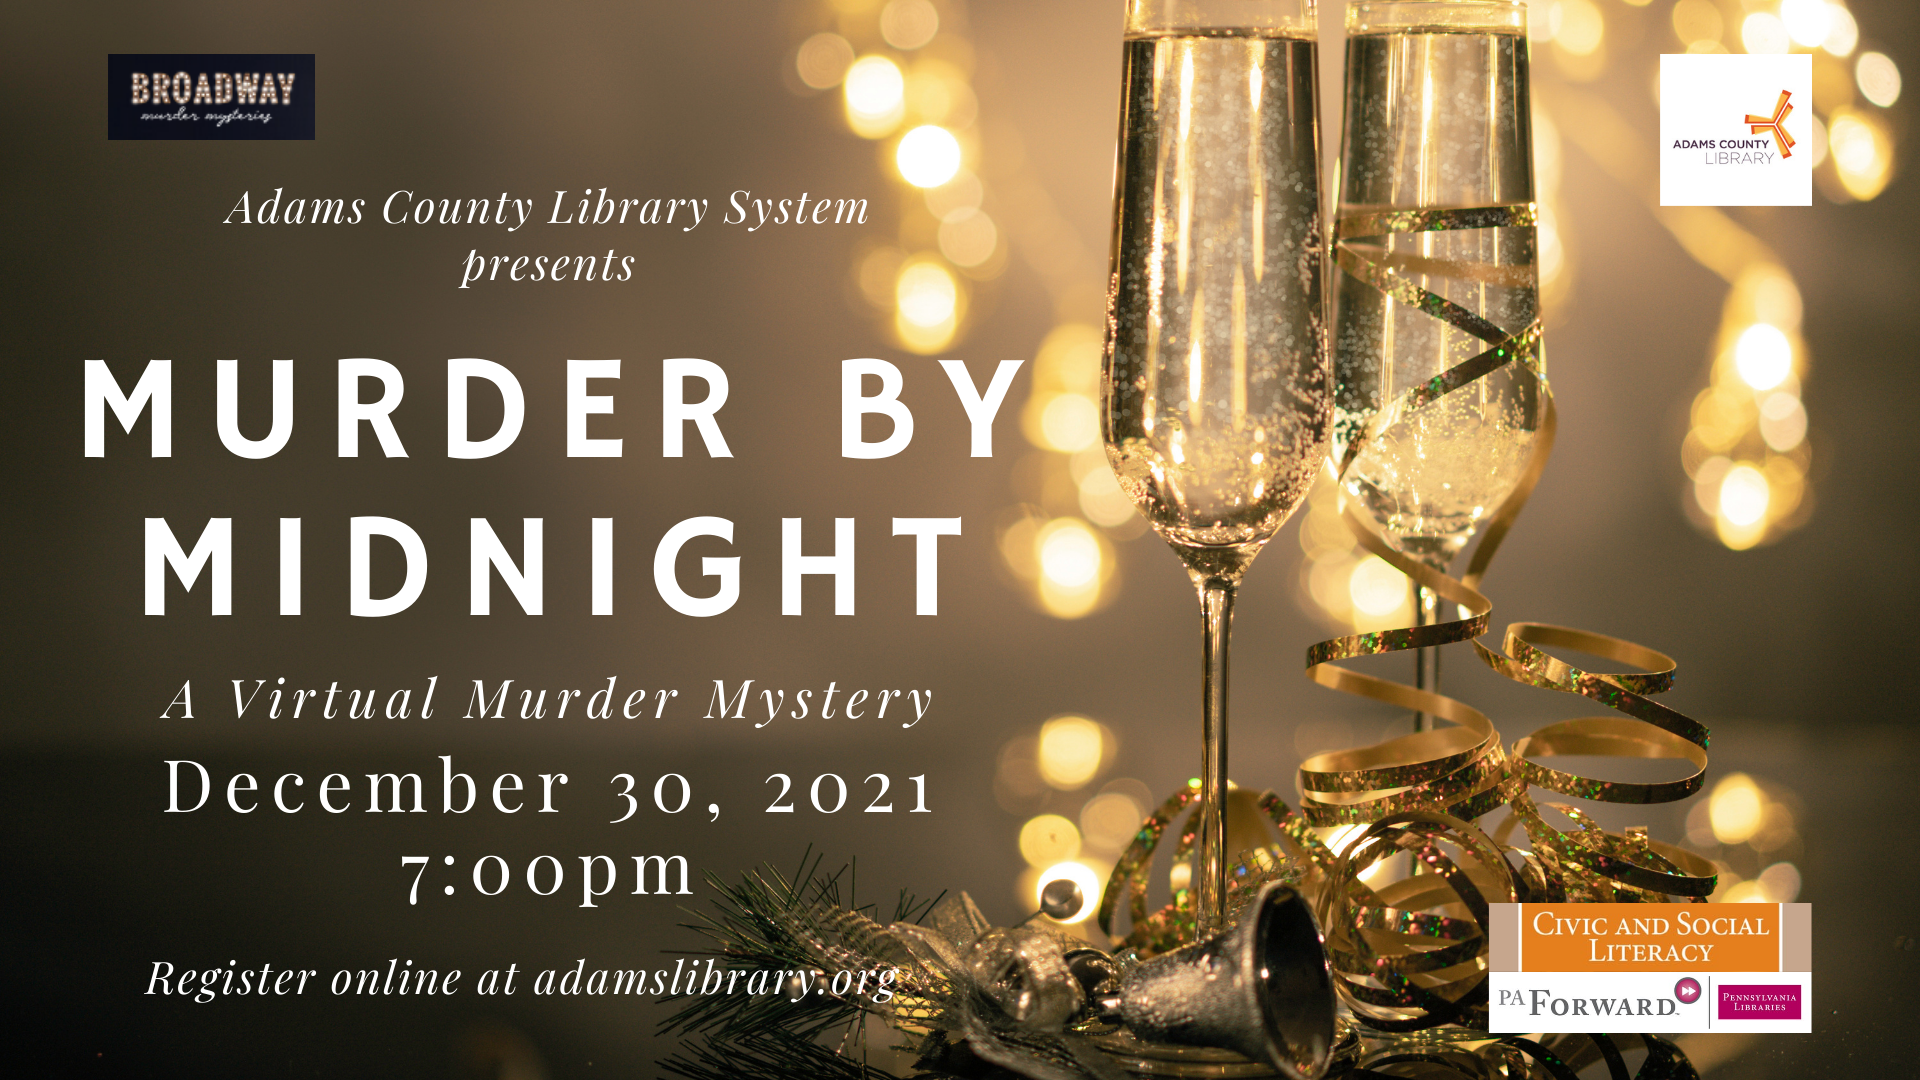 Adams County Library System presents "Murder by Midnight" a virtual murder mystery on Thursday, December 30, 2021 at 7:00pm via Zoom. Register online at adamslibrary.org/events.